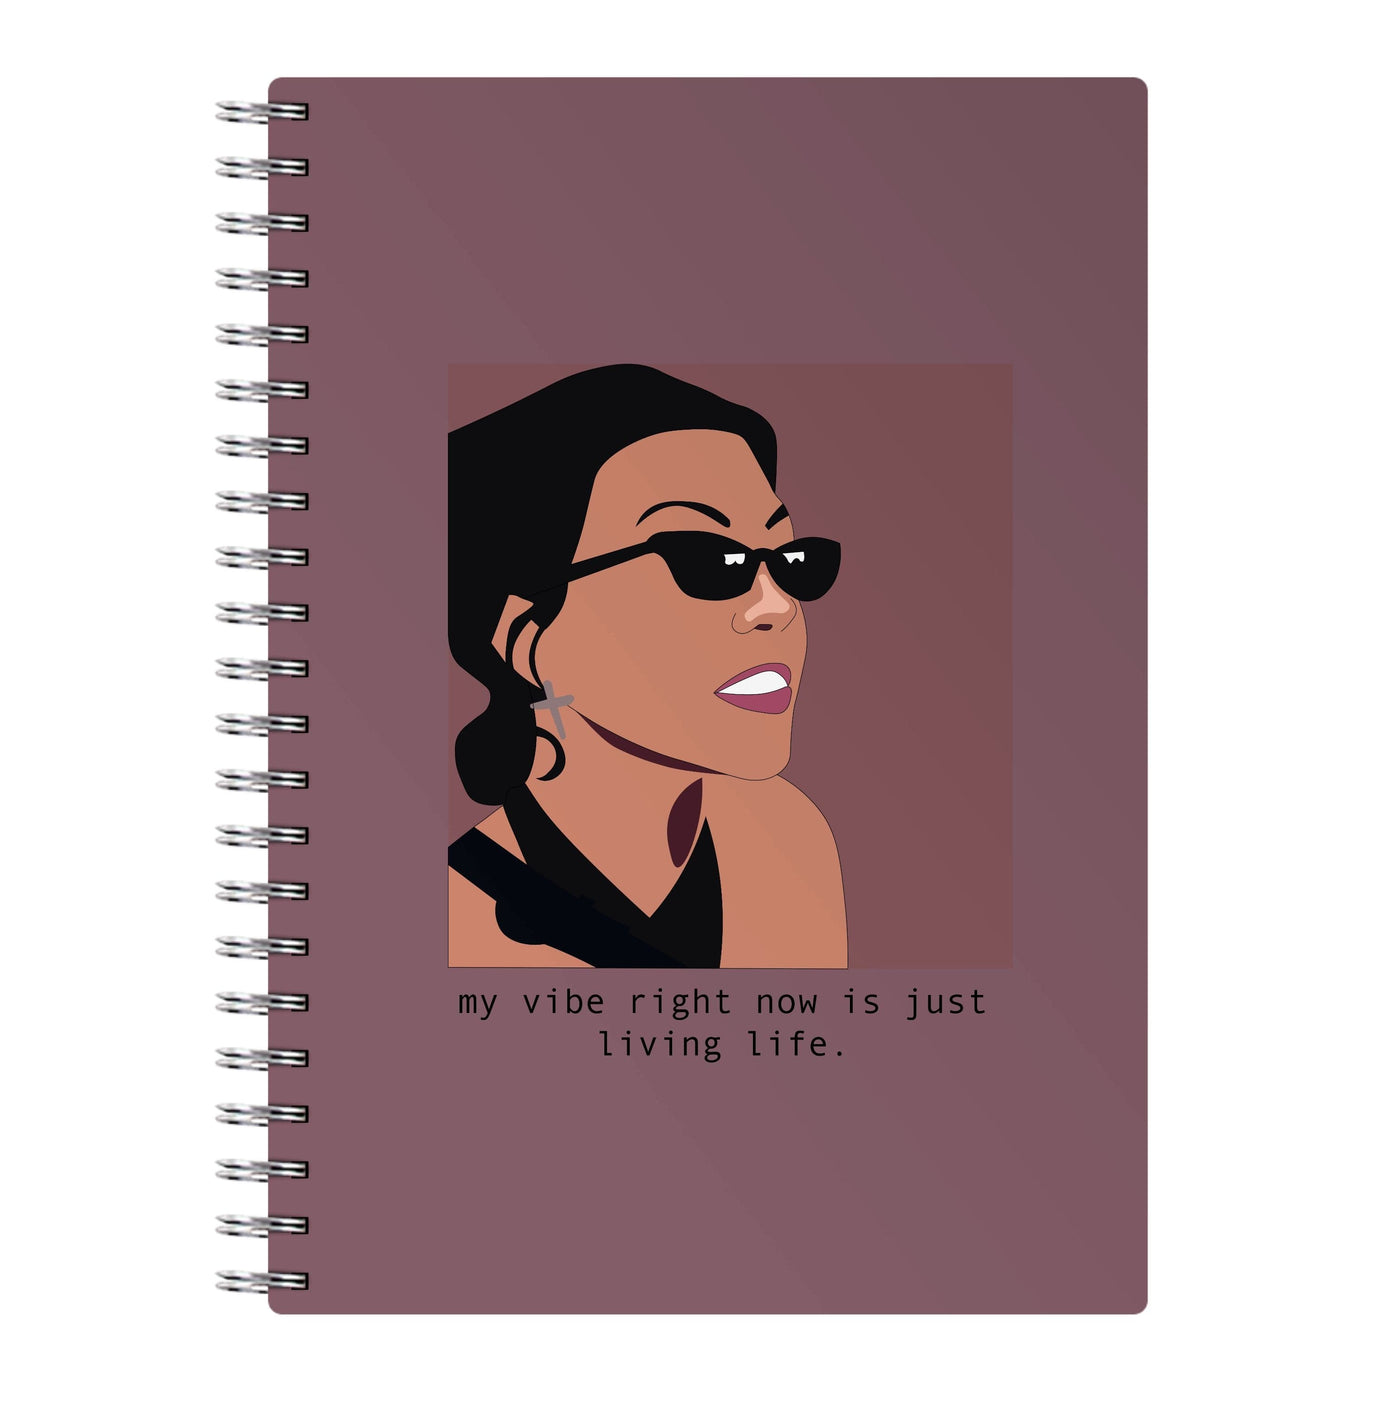 My vibe right now is just living life - Kourtney Kardashian Notebook